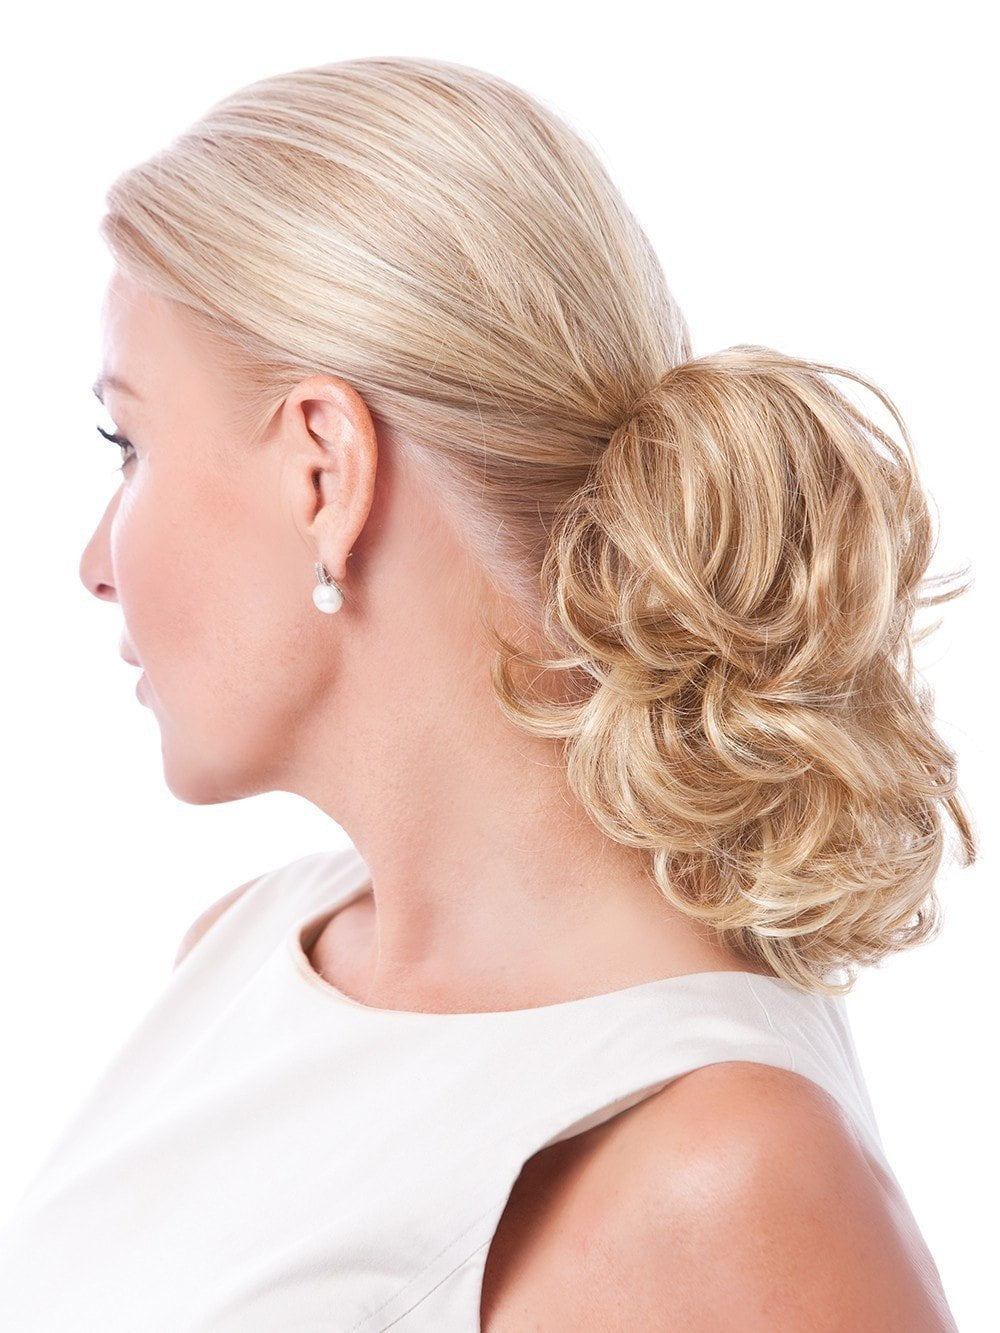 This instant ponytail gives you a variety of easy, fun looks!